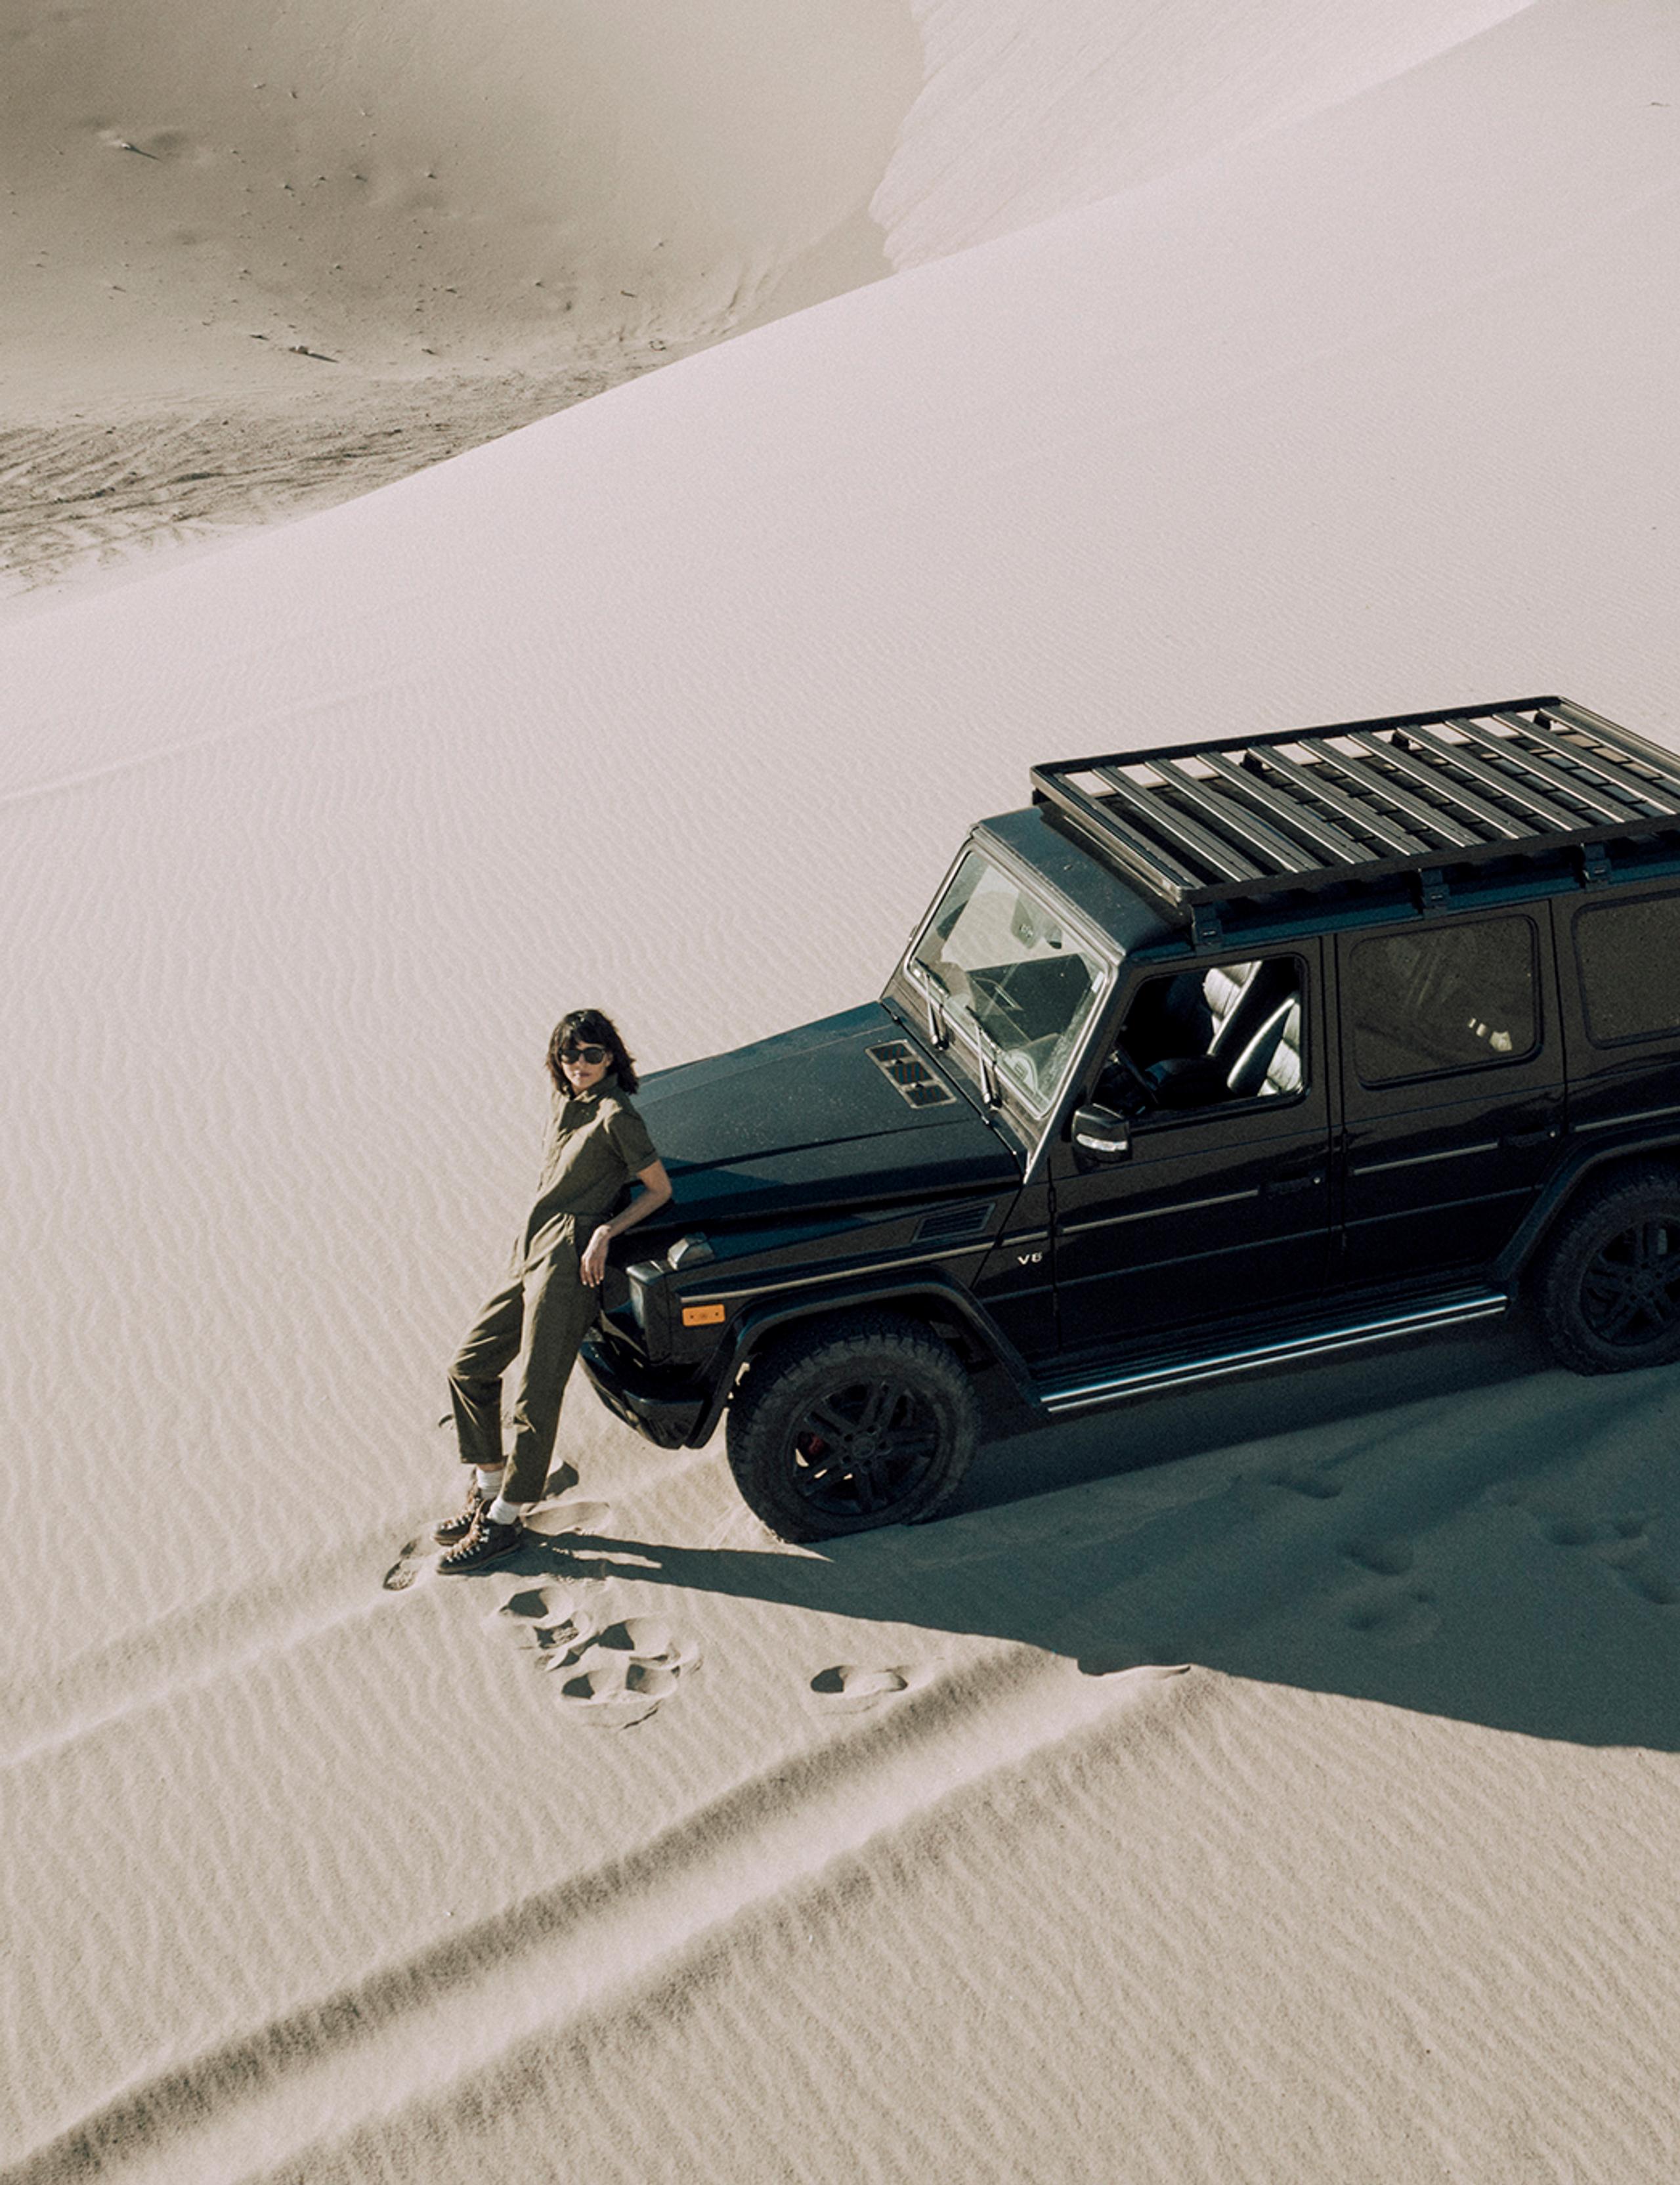 Aerial view of woman standing next to black G wagon in sand dune landscape